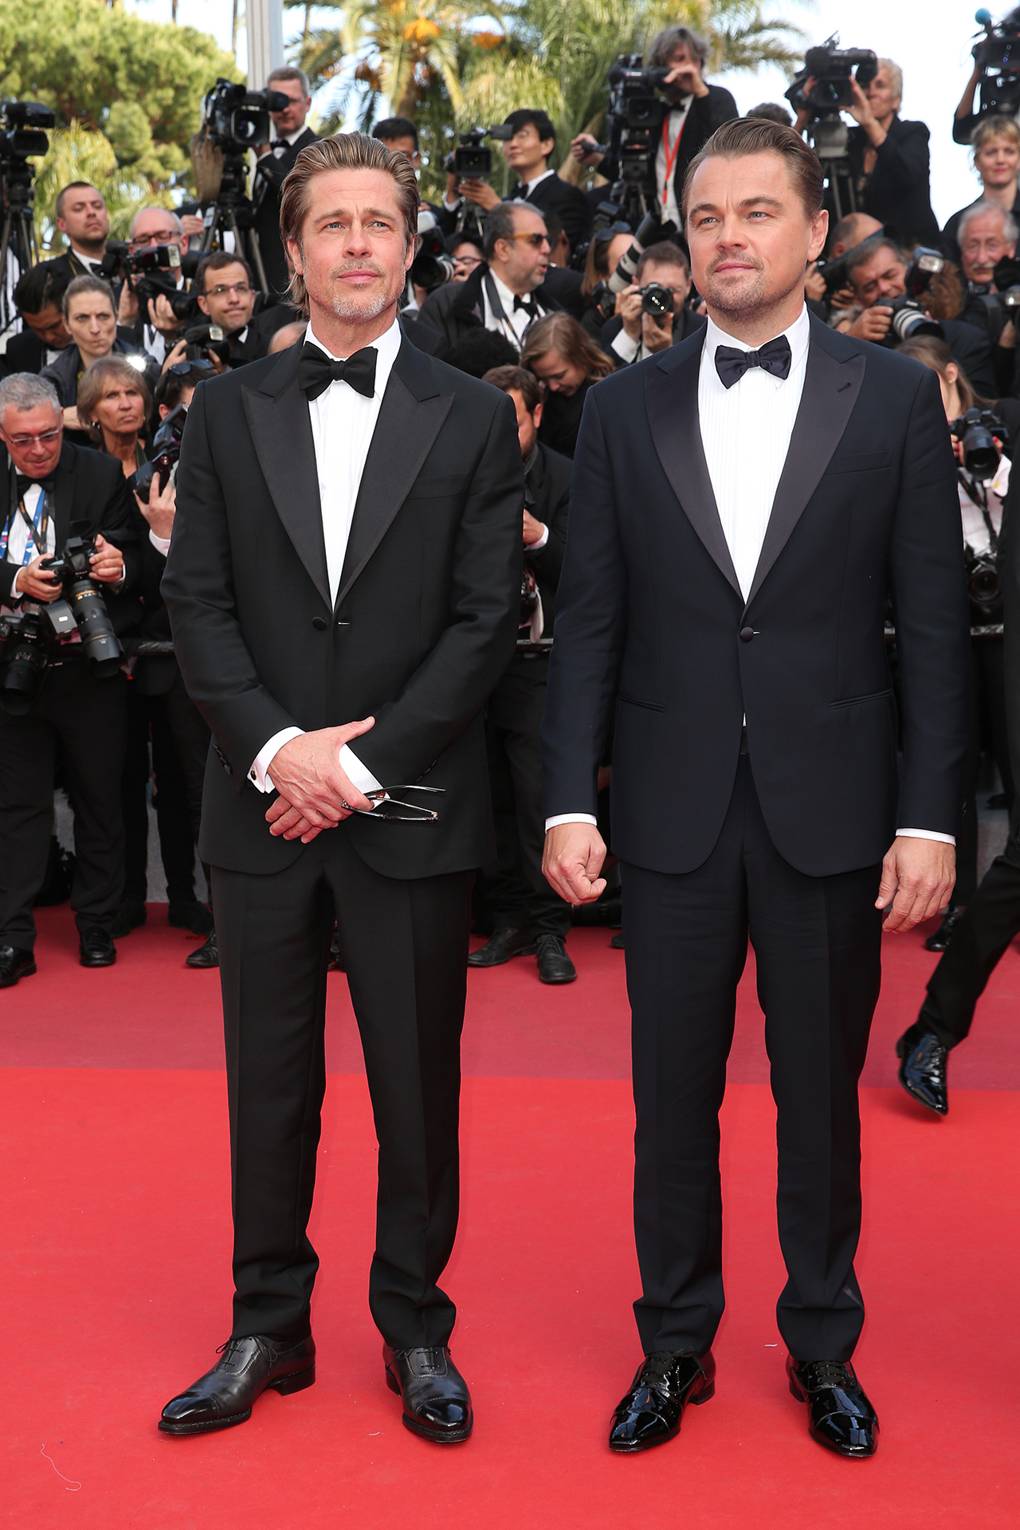 Tuxedo Tips from the Men of Cannes 2019